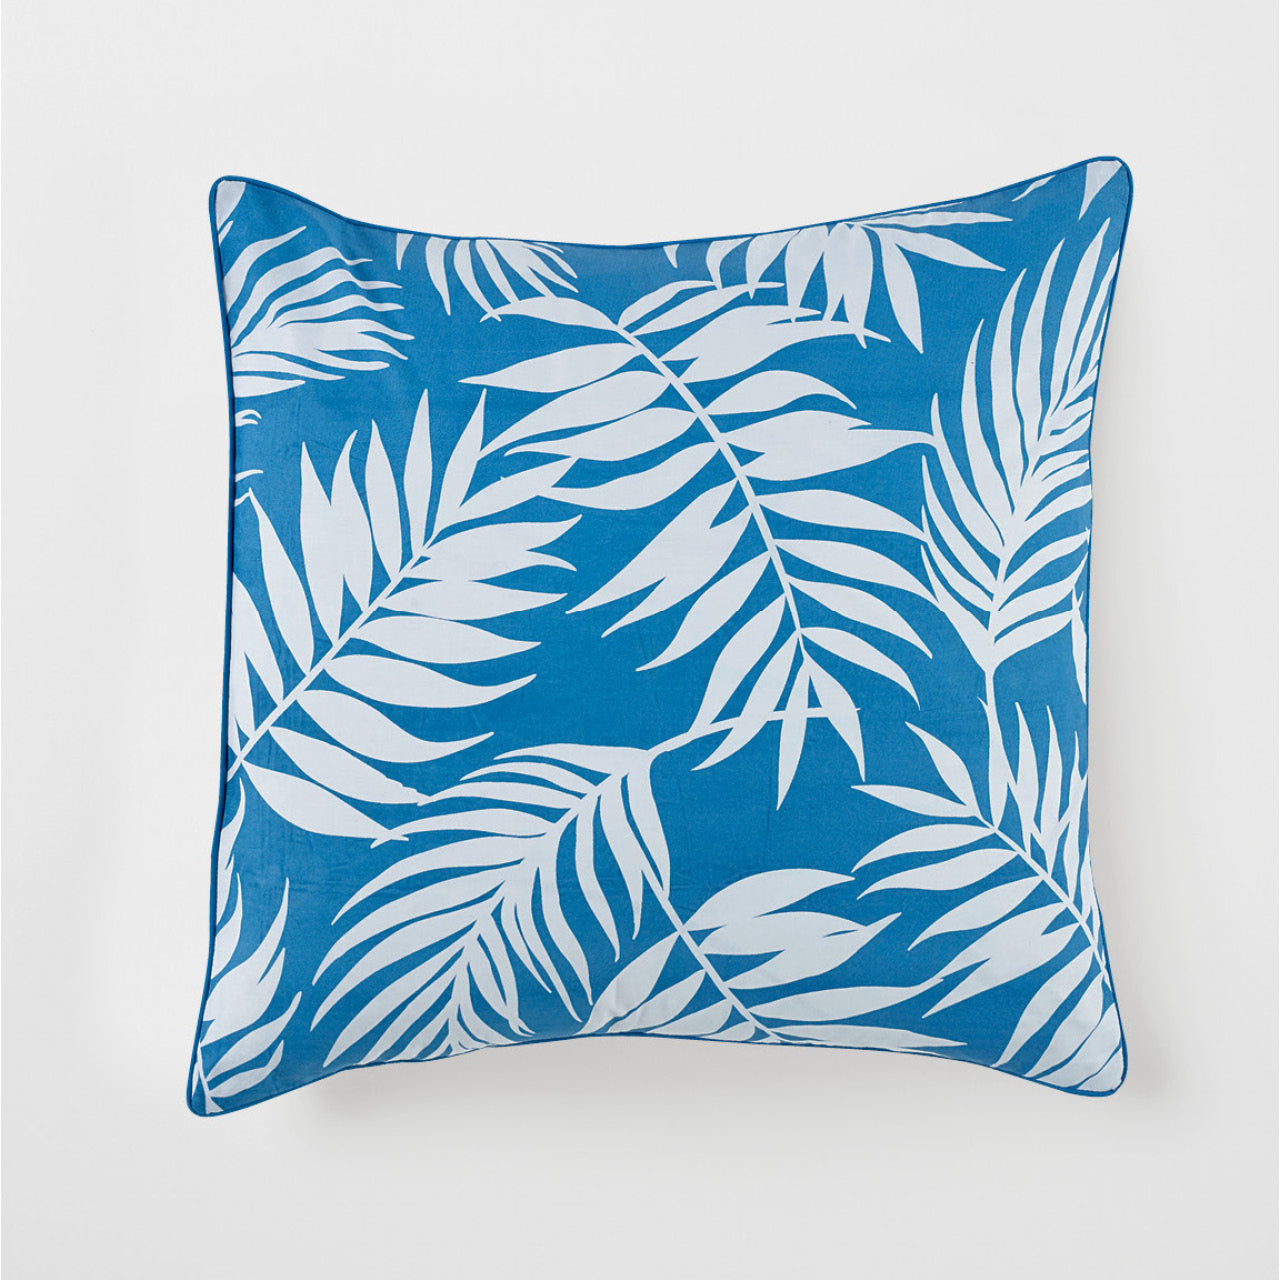 Avoca Cushion Cover on a white background